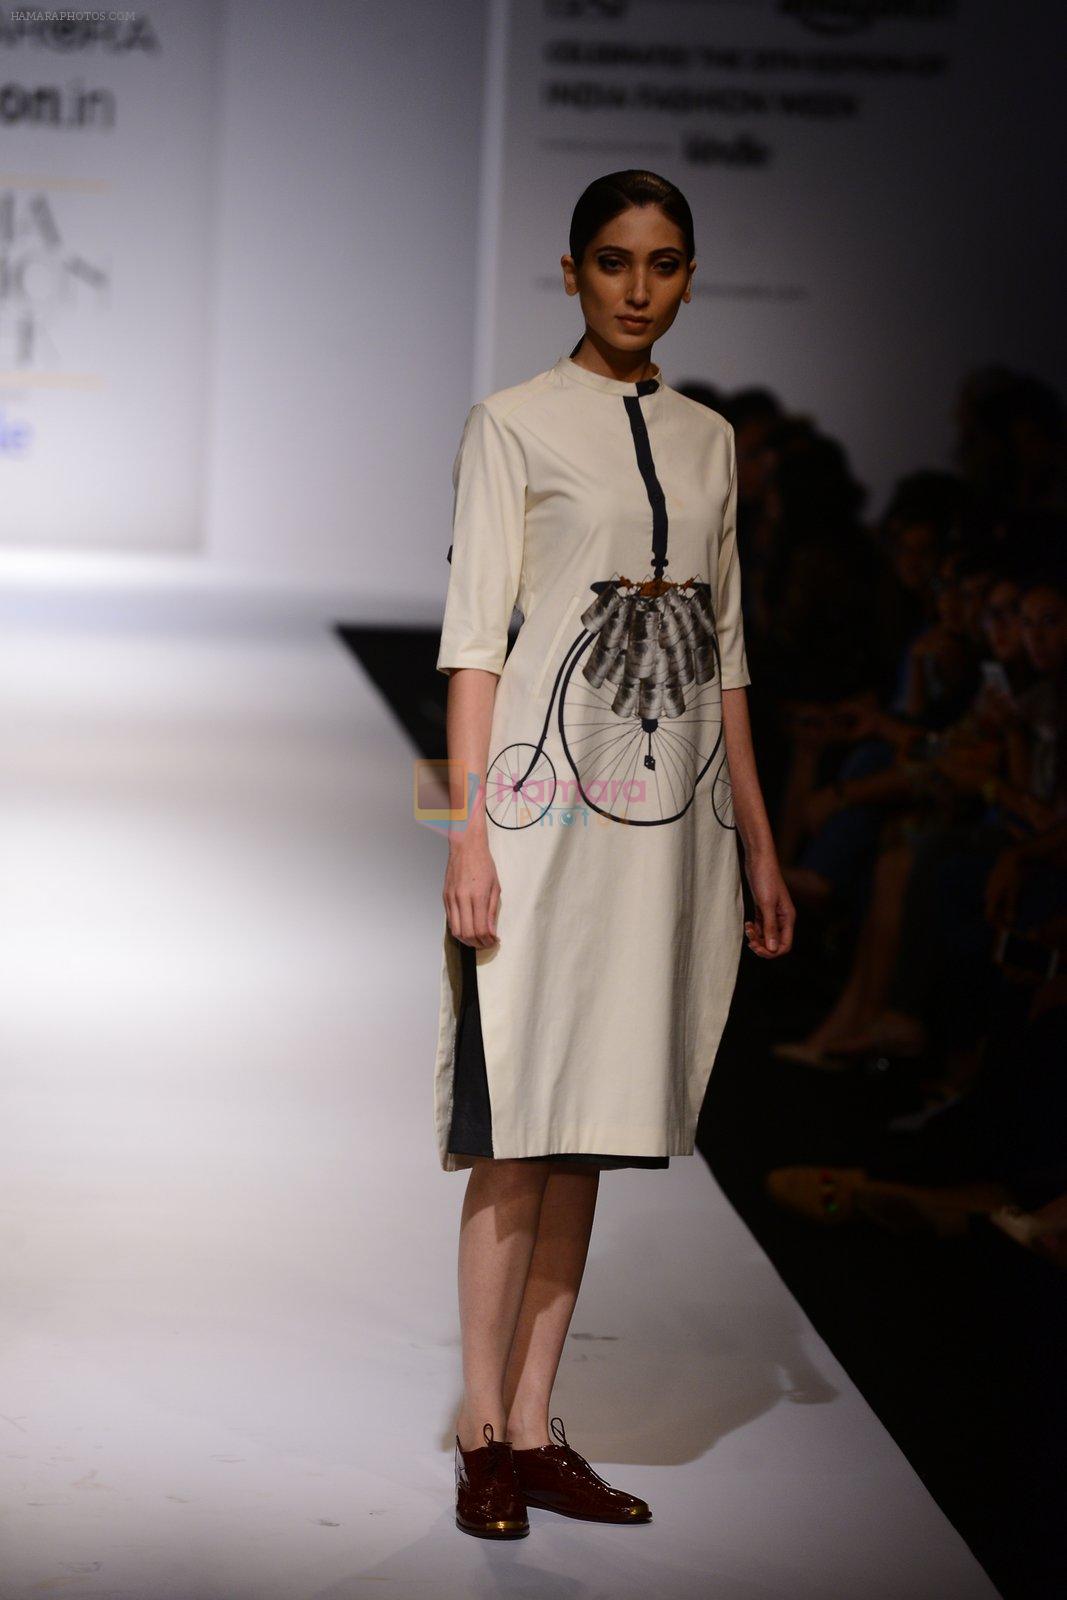 Model walk the ramp for Sneha Arora on day 4 of Amazon India Fashion Week on 28th March 2015